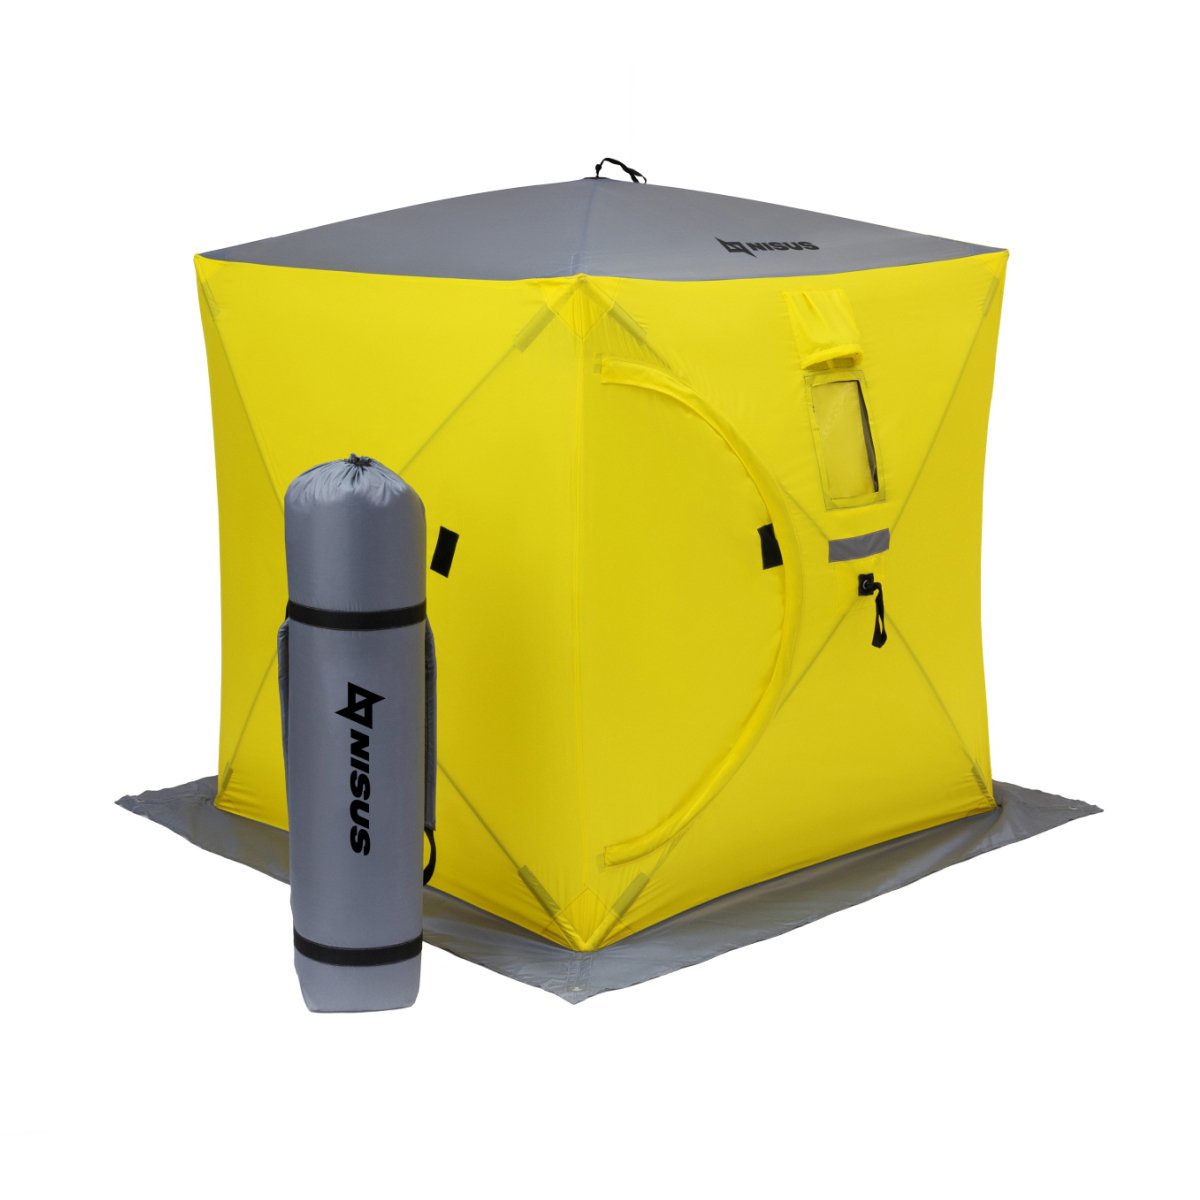 Cube Portable Pop-Up Ice Fishing Shelter for 2 Persons has a carrying bag attached